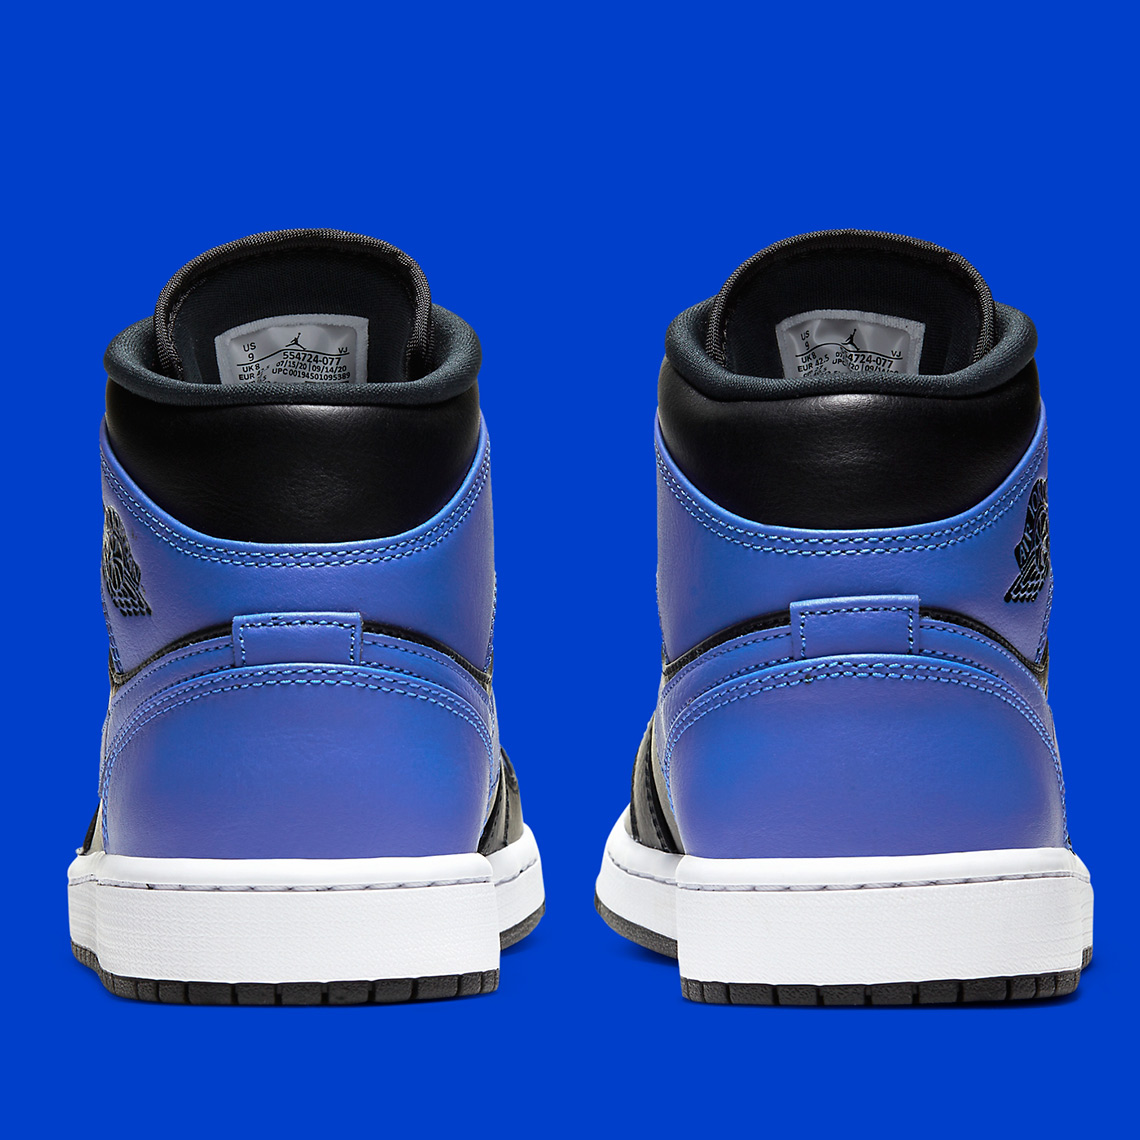 This Air Jordan 1 Mid Royal Comes With Orange Speckling •